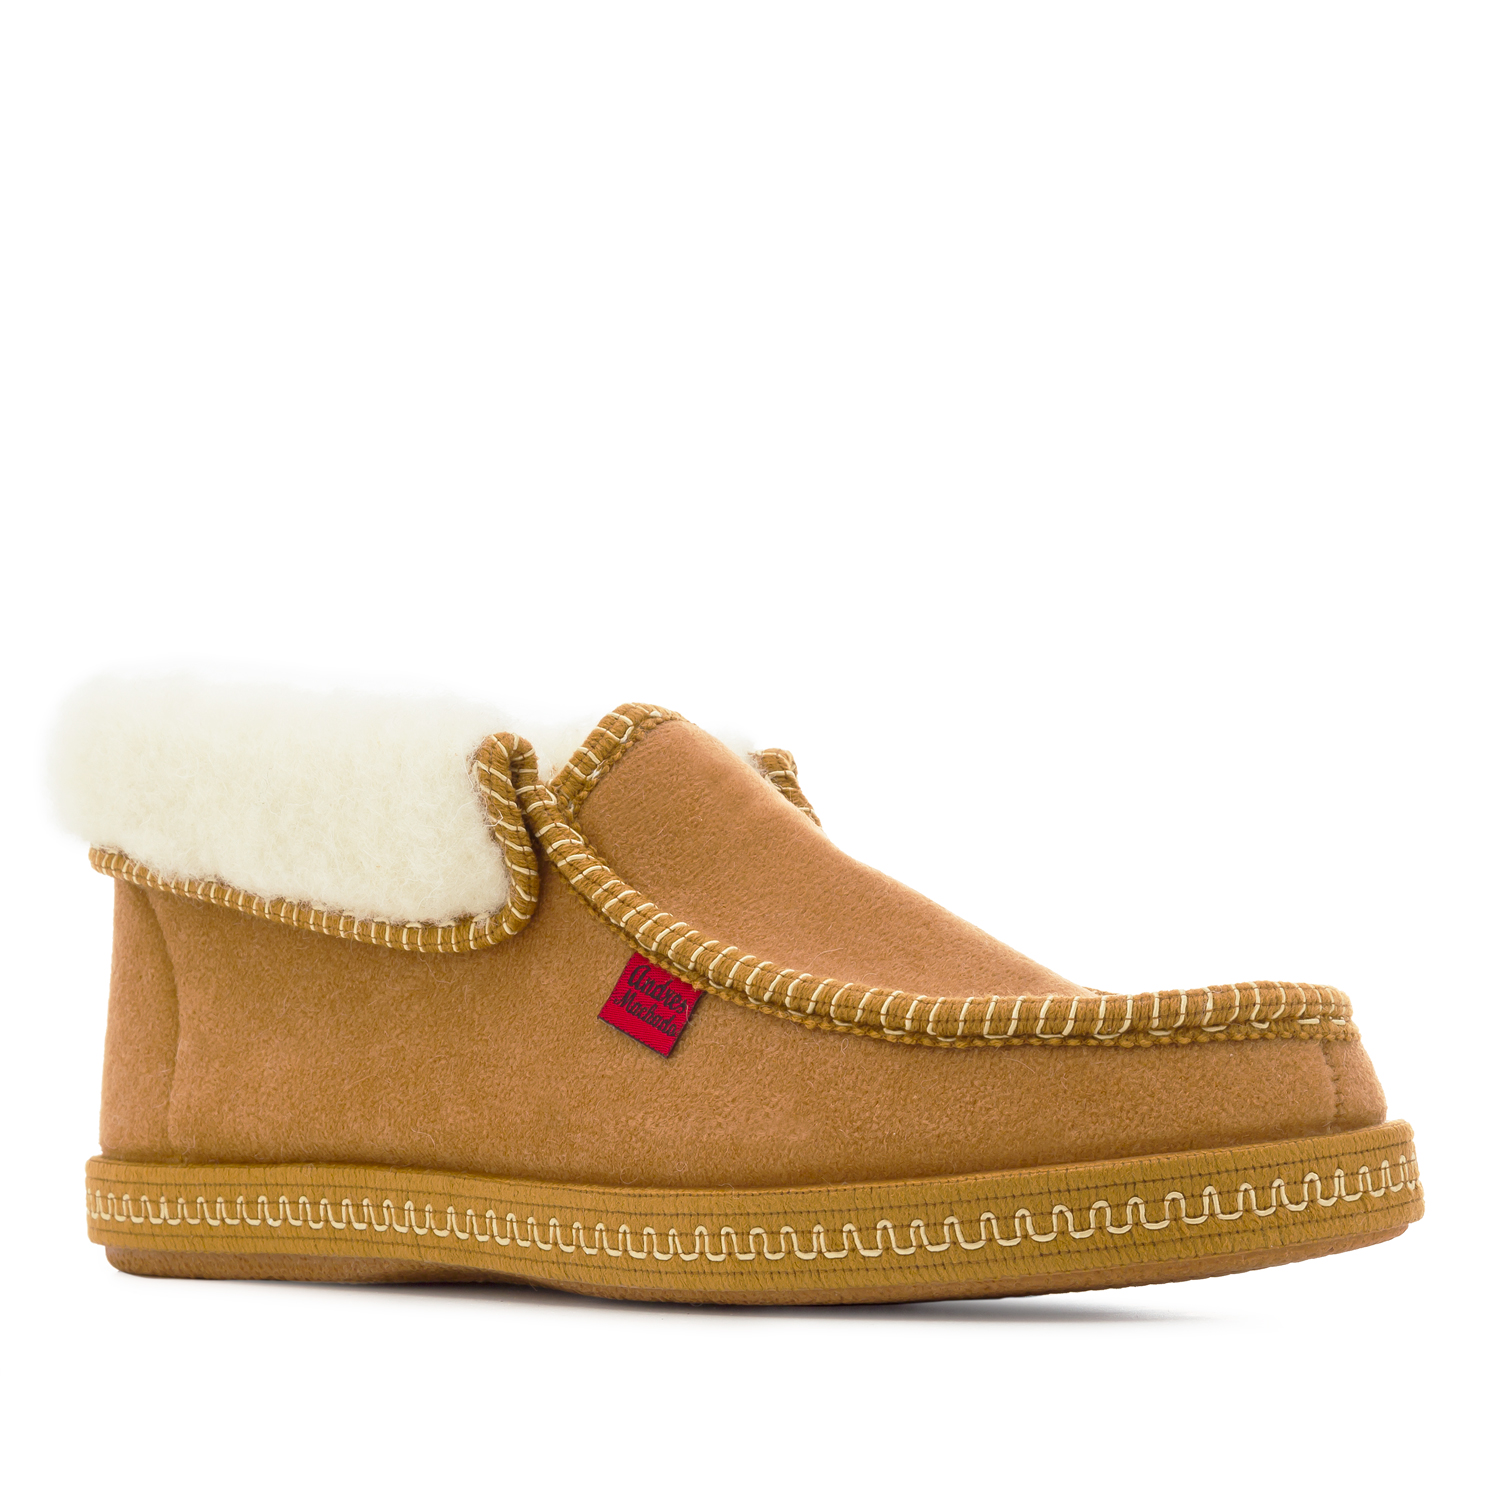 Camel Ankle High Slippers. 